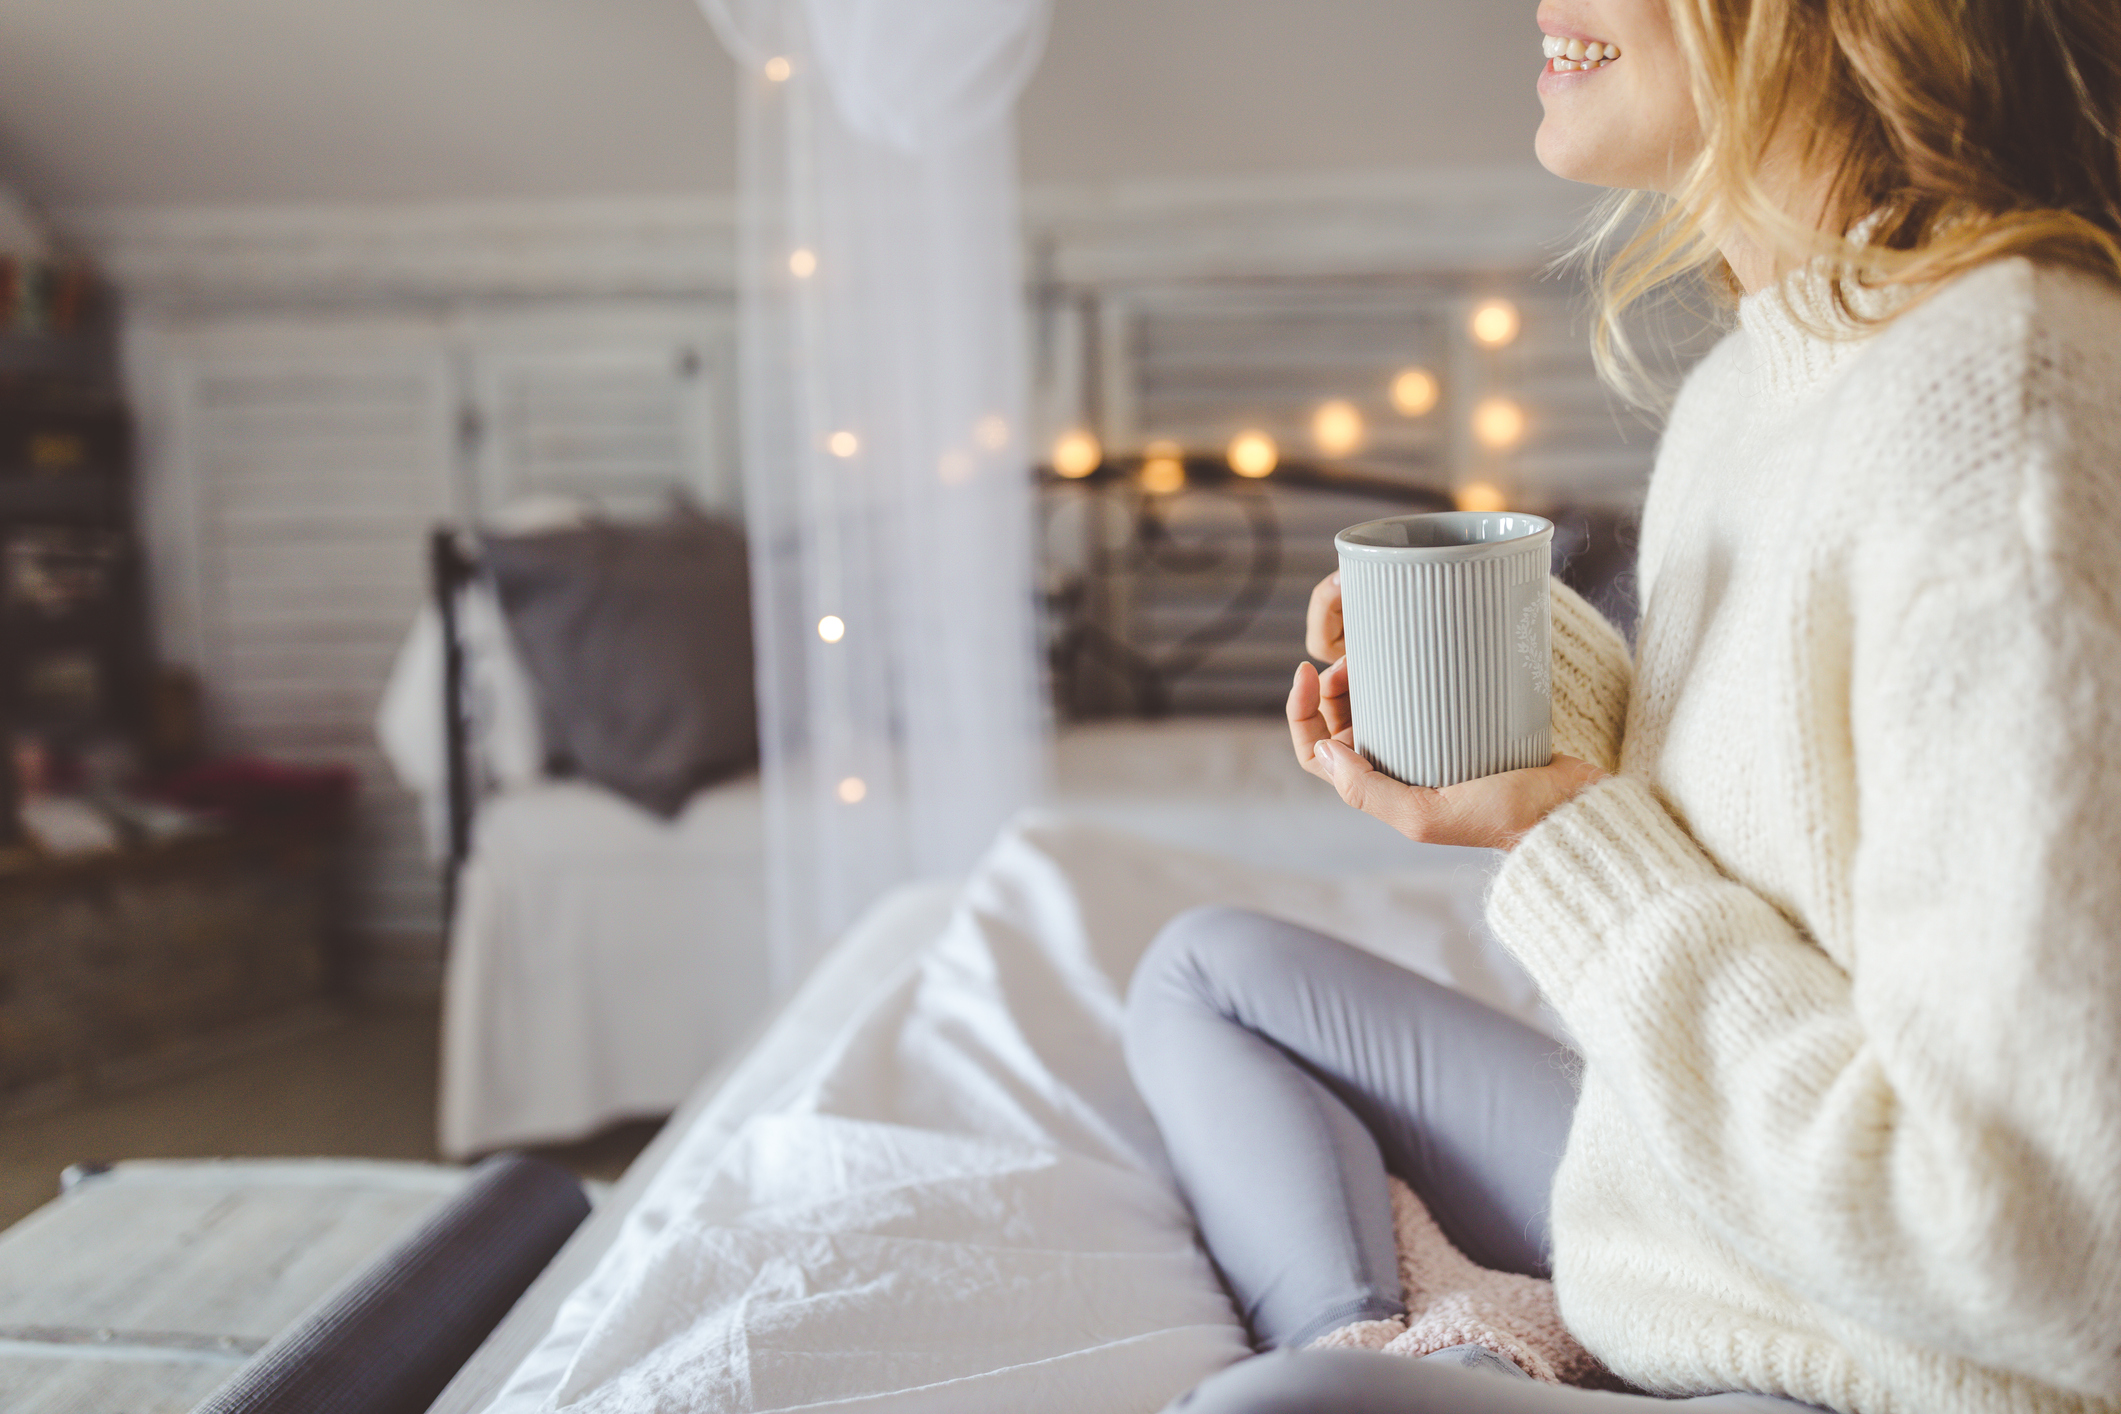 Practice Hygge to Help Beat the Winter Blues